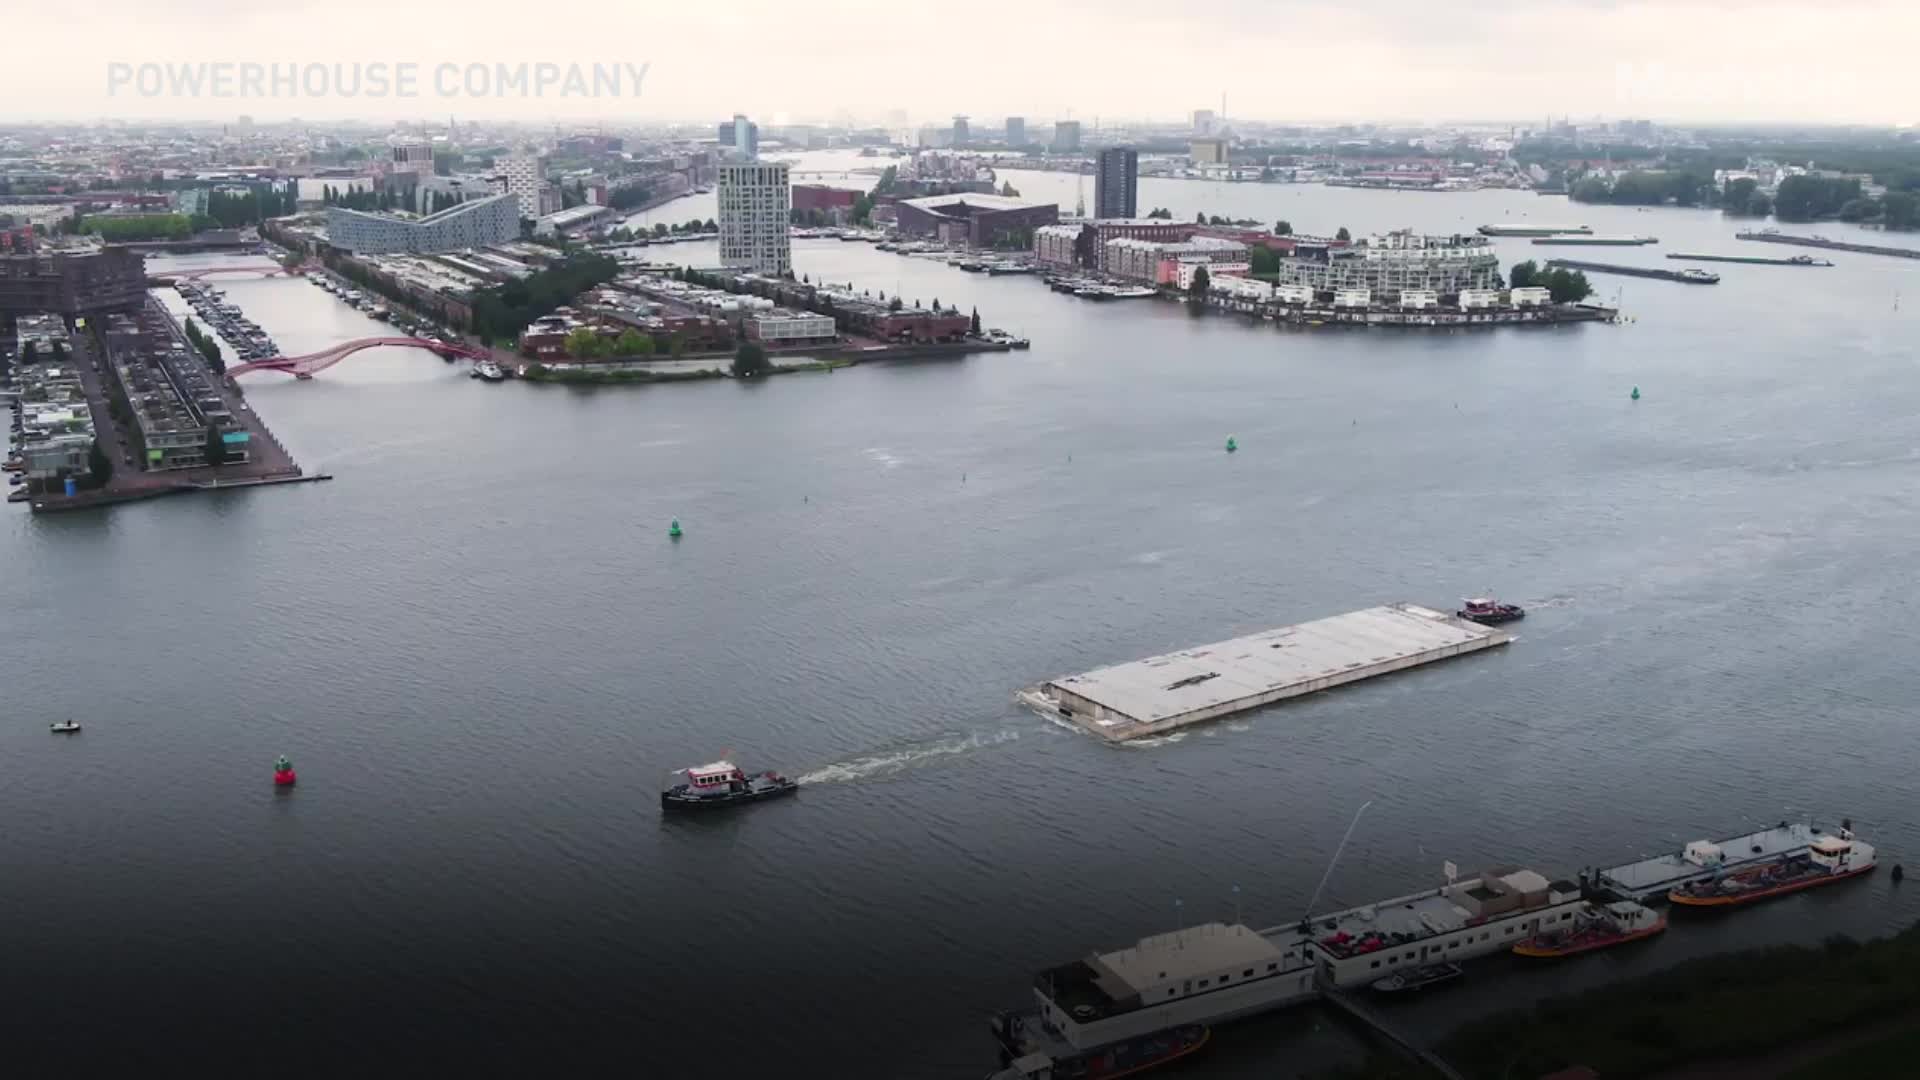 This solar-powered platform will be the world's largest floating office